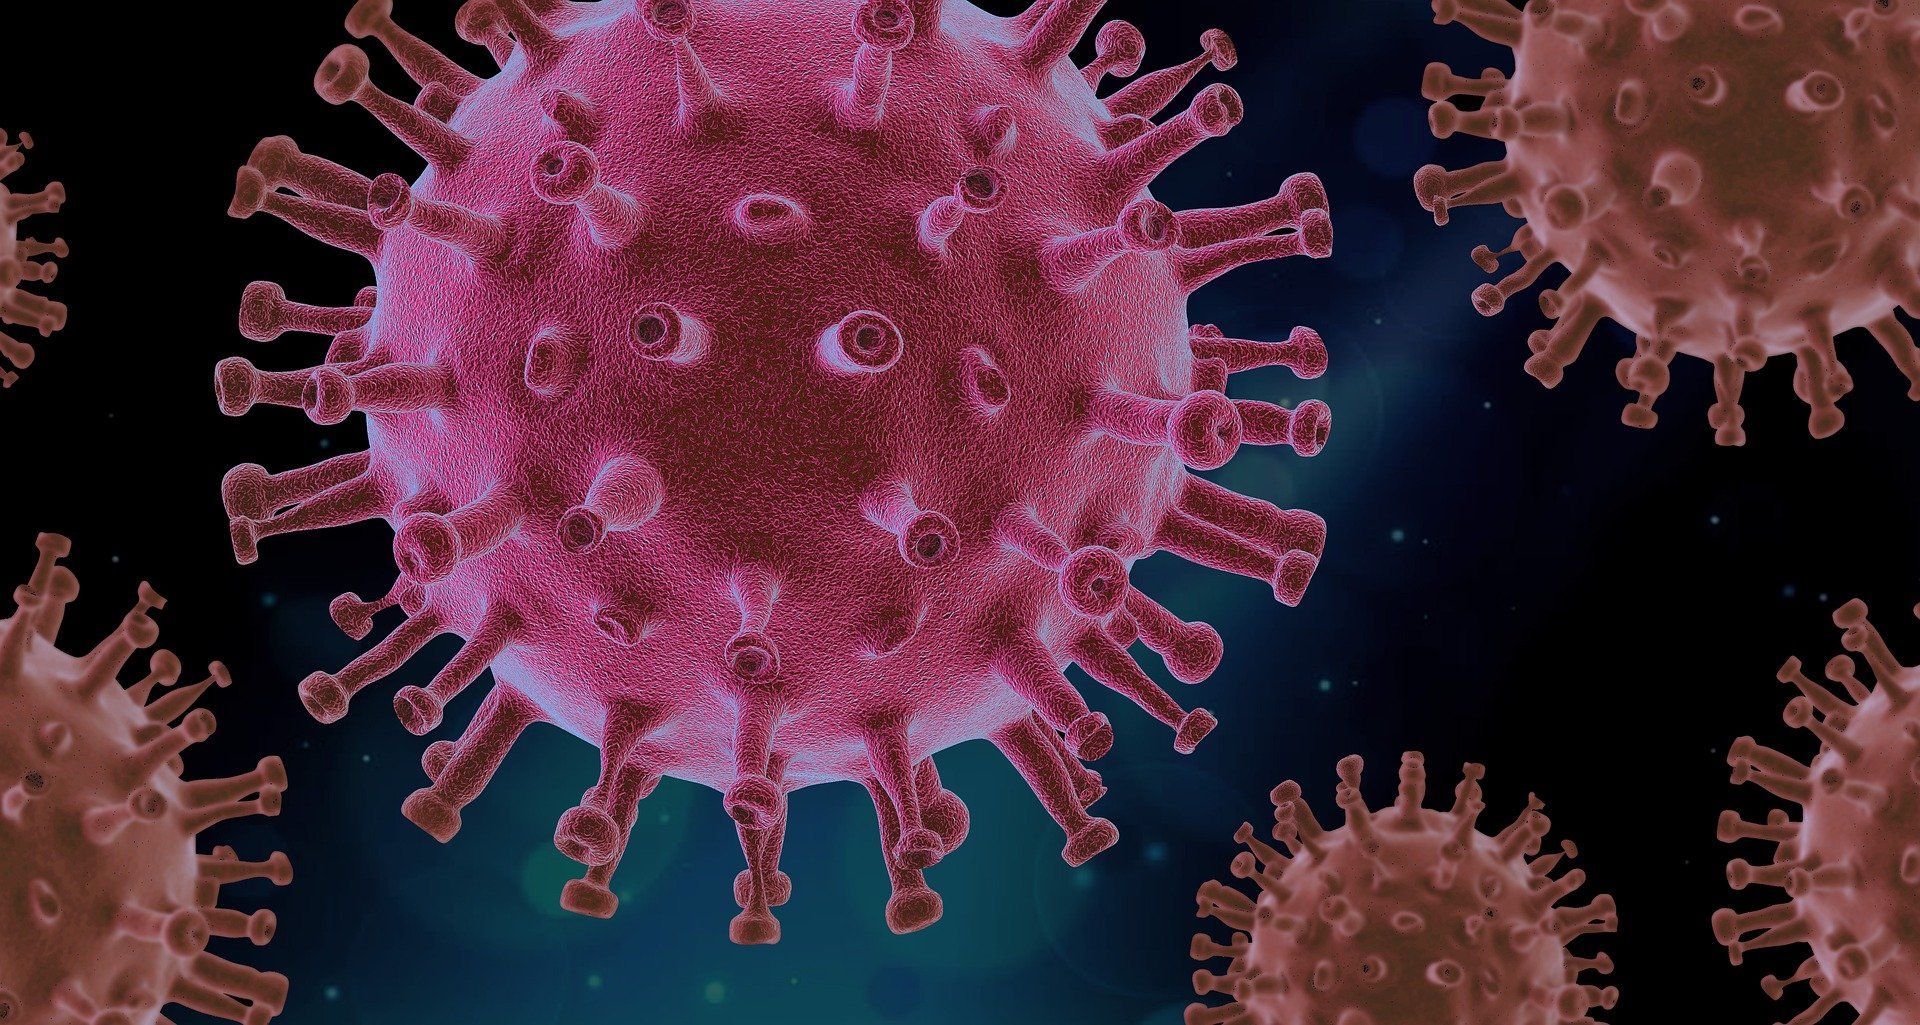 Israel discovers new variant of coronavirus: Here are 5 things to know